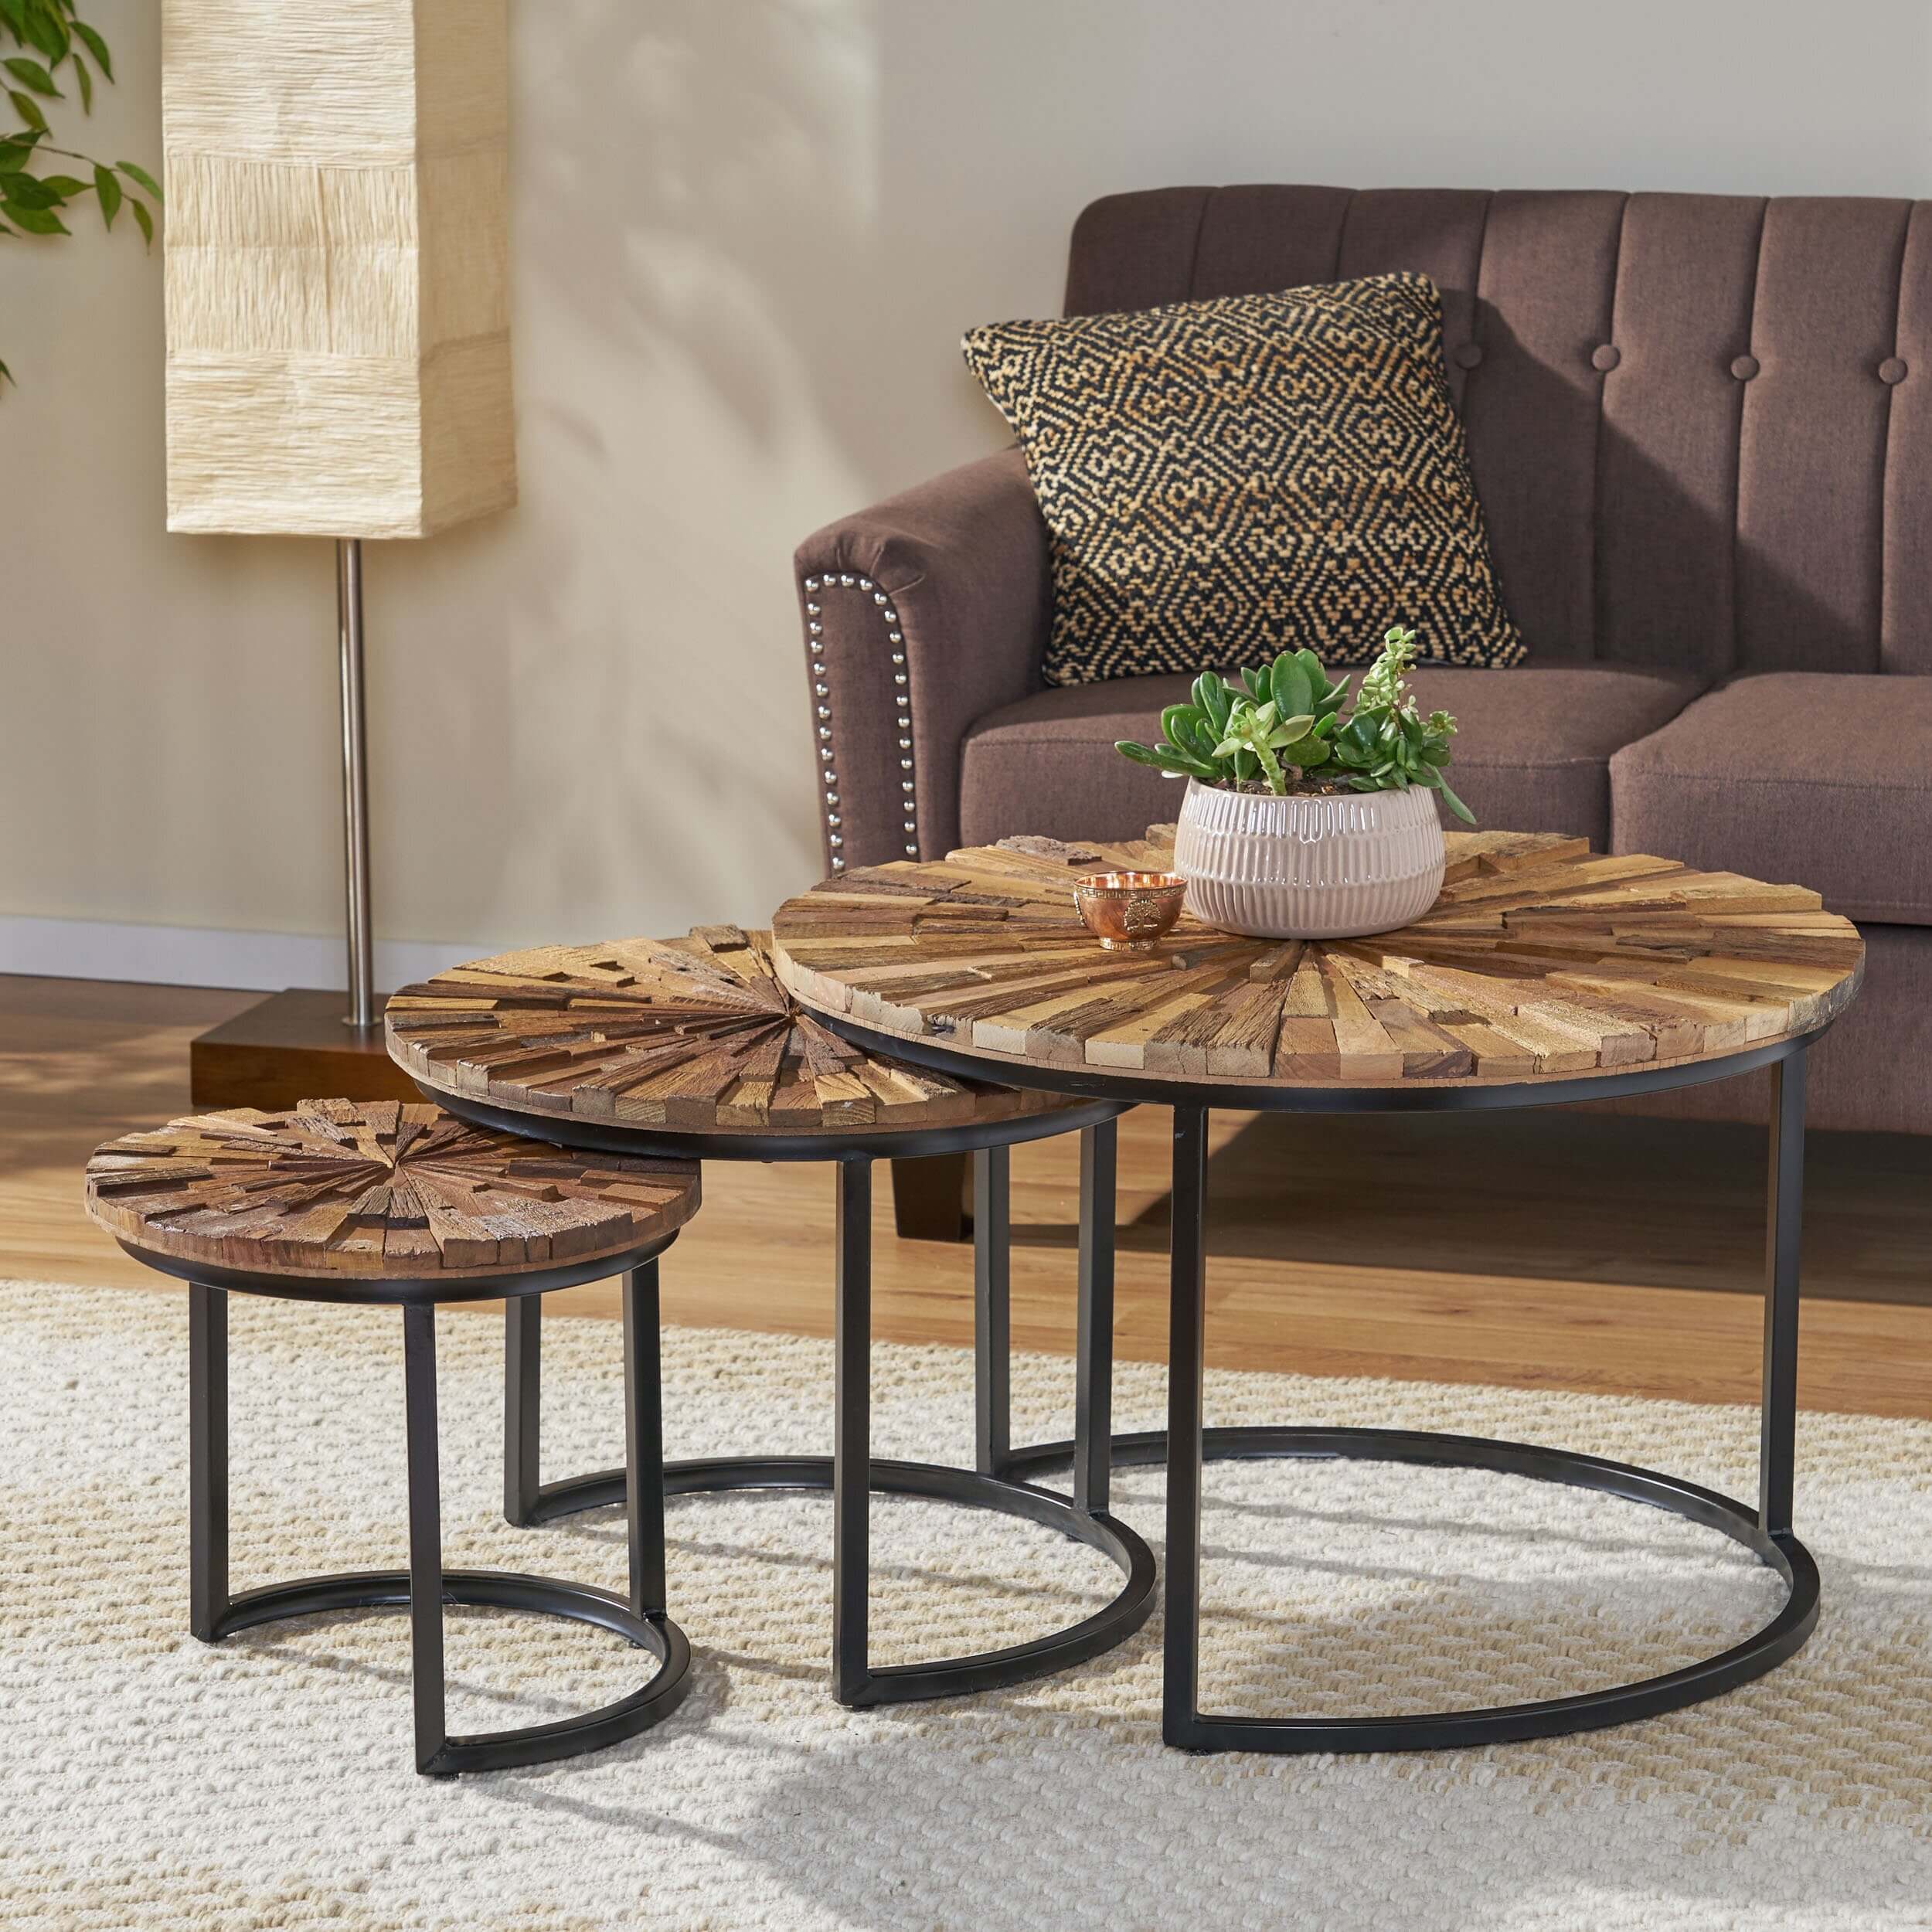 Living Room Coffee Table Trends and Novelties 1